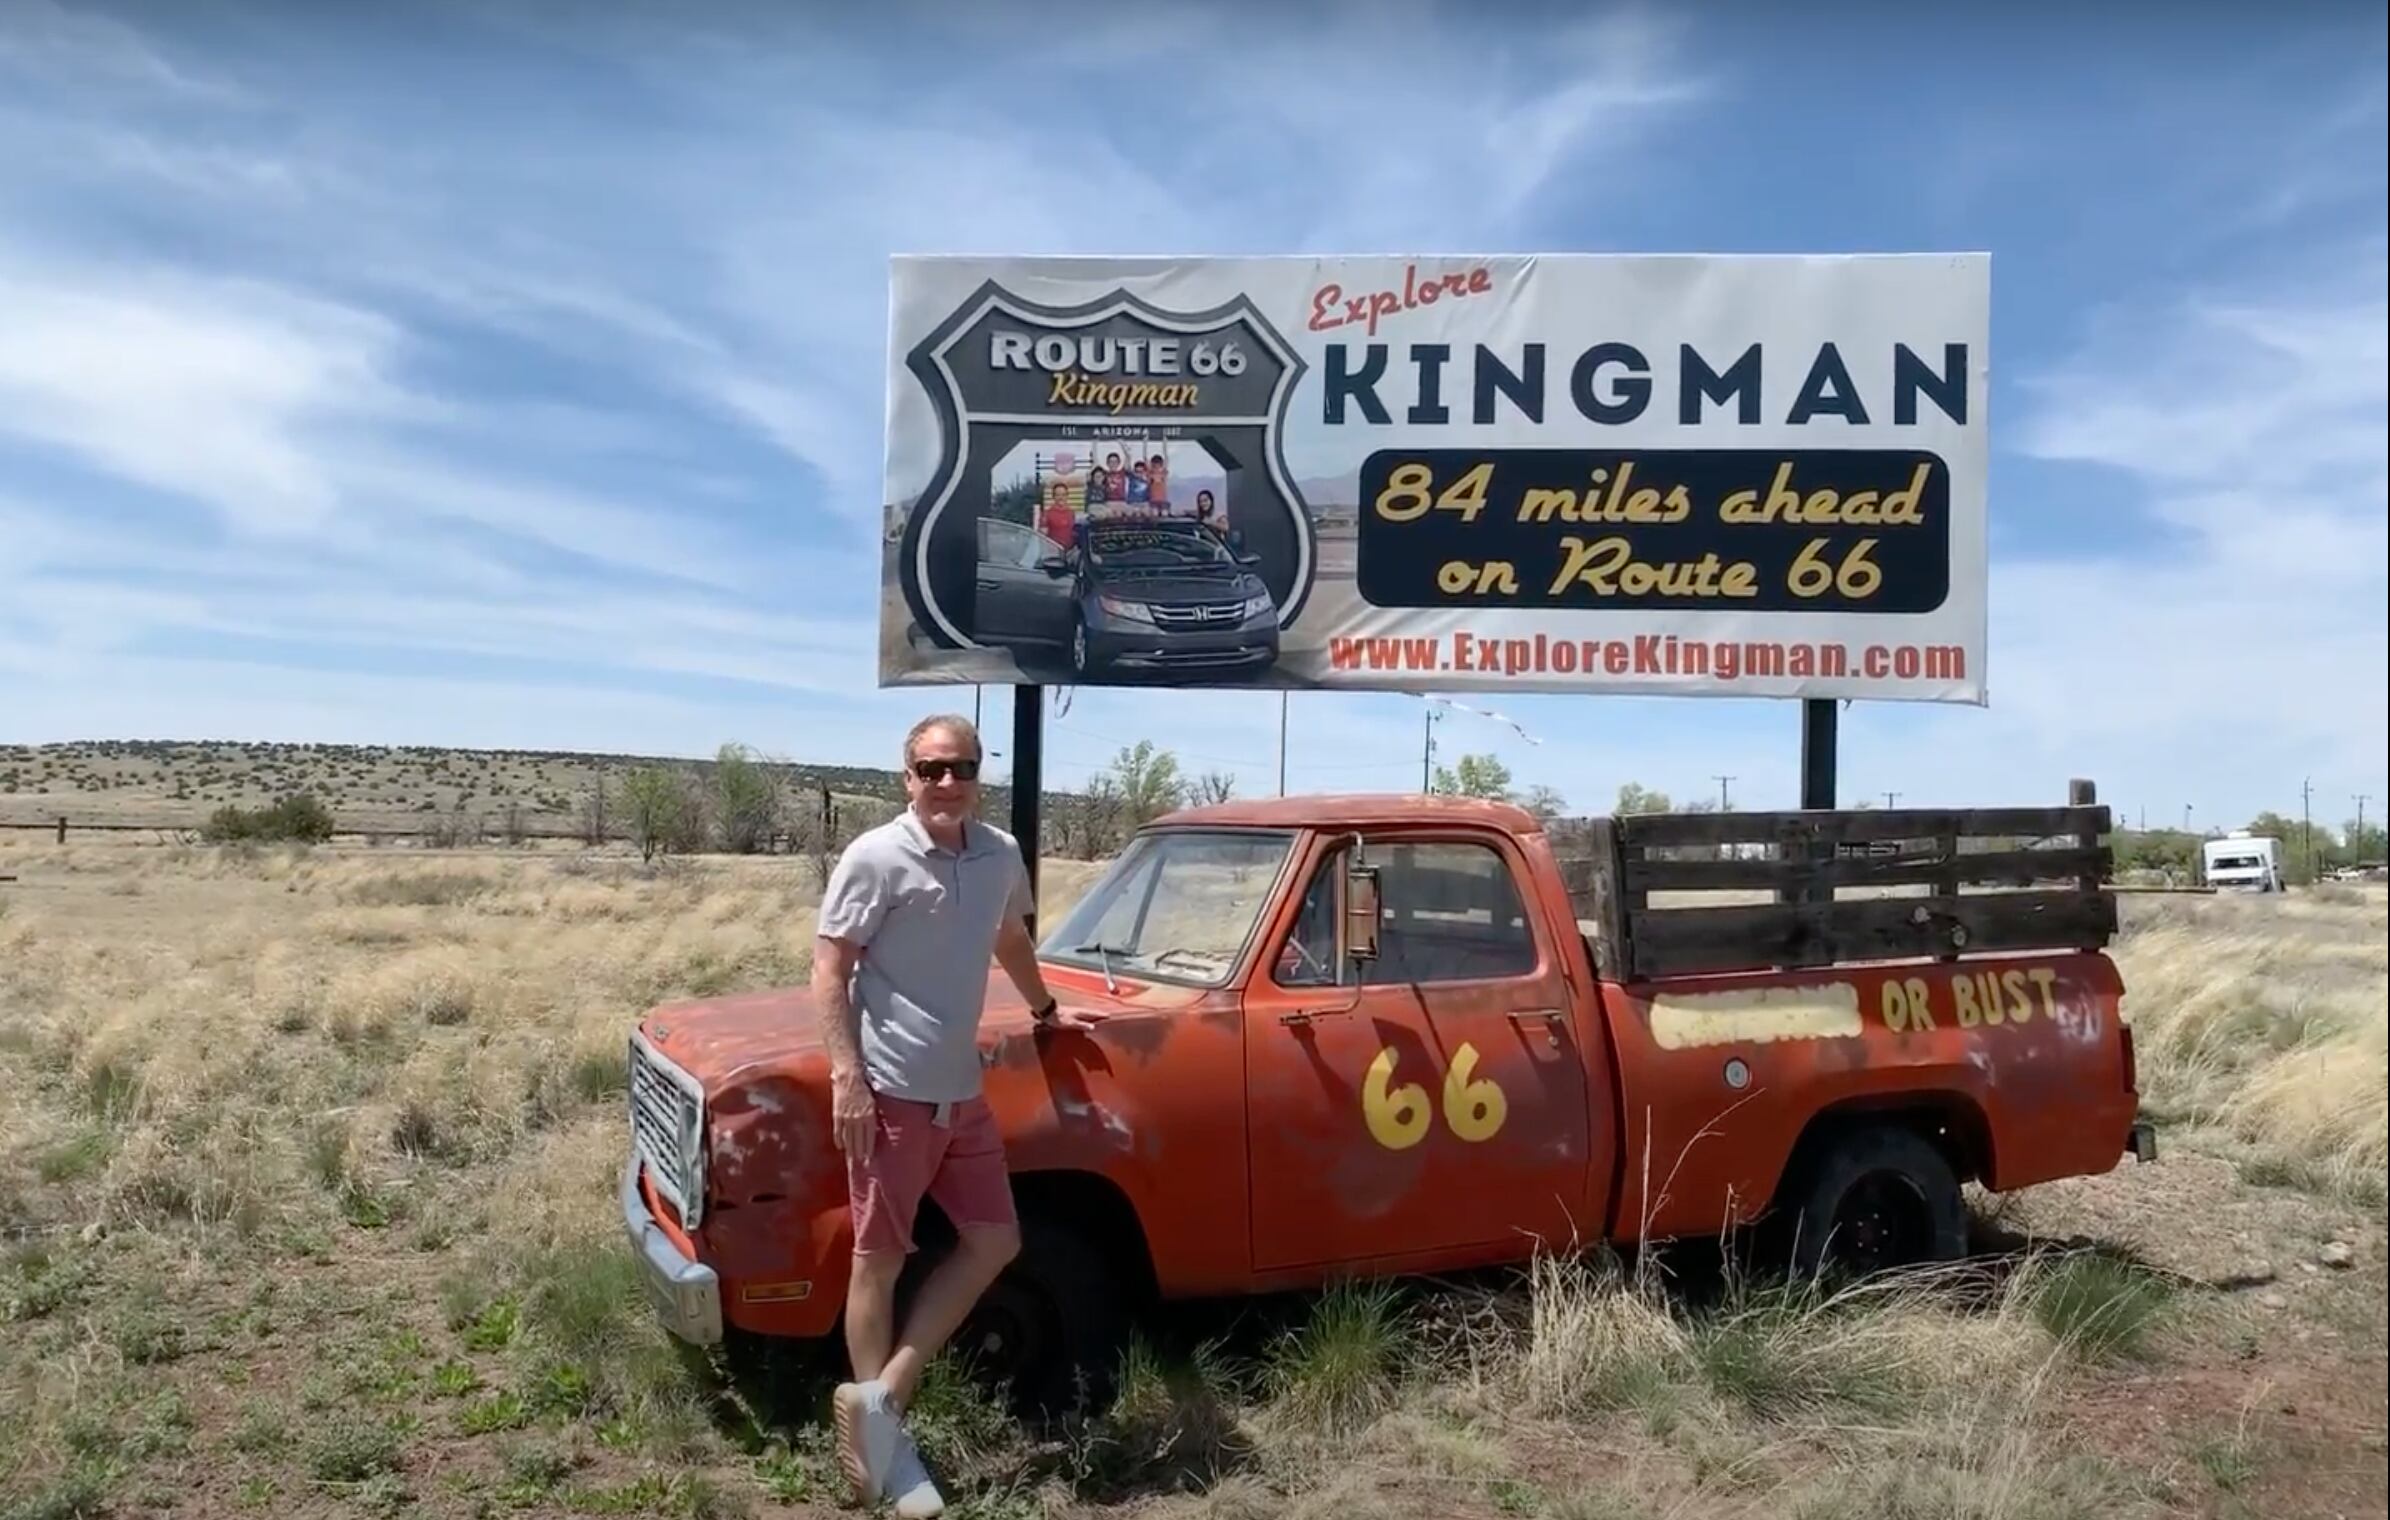 A billboard advertising the popular Route 66 town of Kingman, home to the drive-thru Route 66 shield.